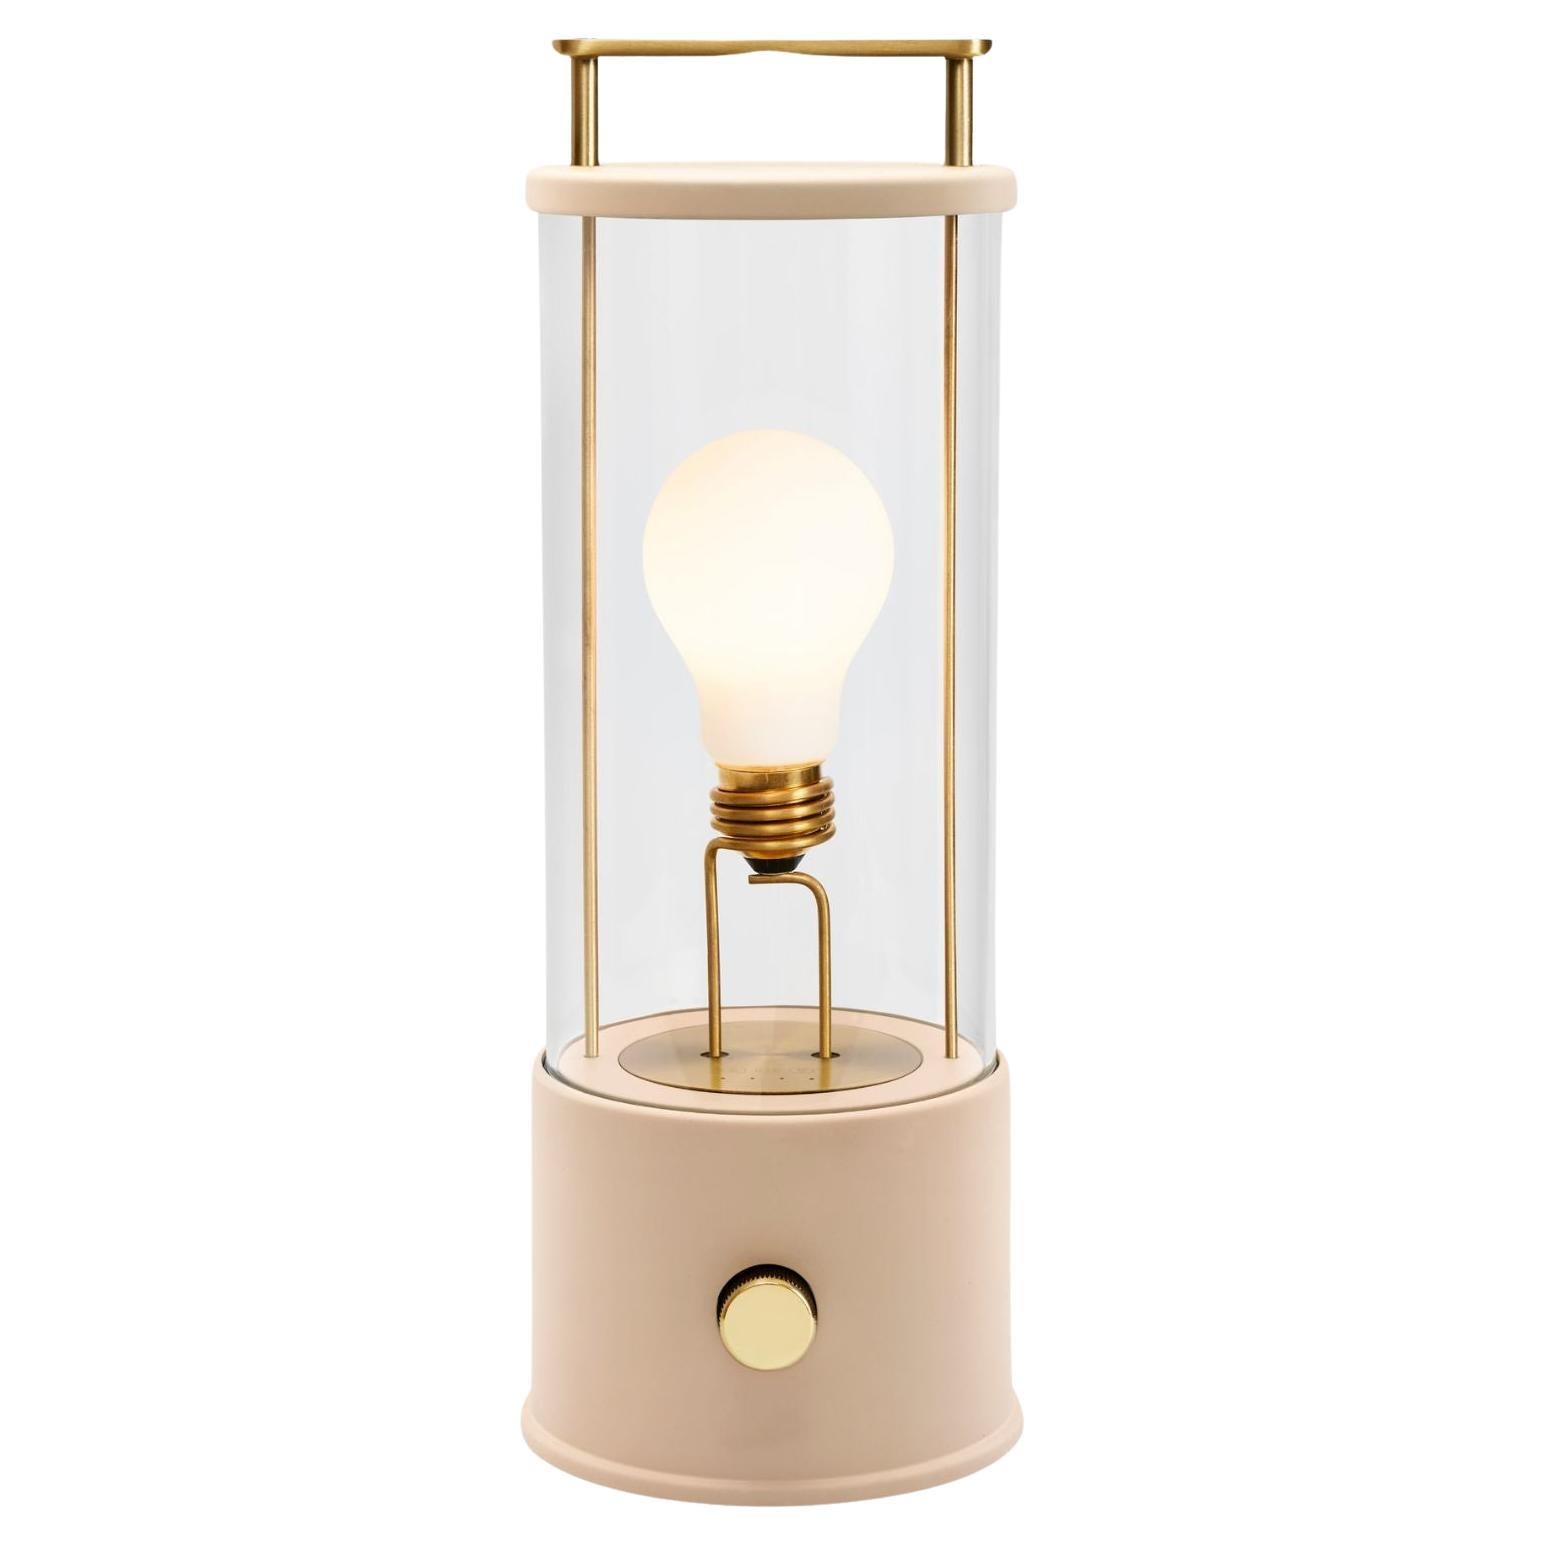 'The Muse' Portable Lamp in Plaster Pink by Farrow & Ball for Tala